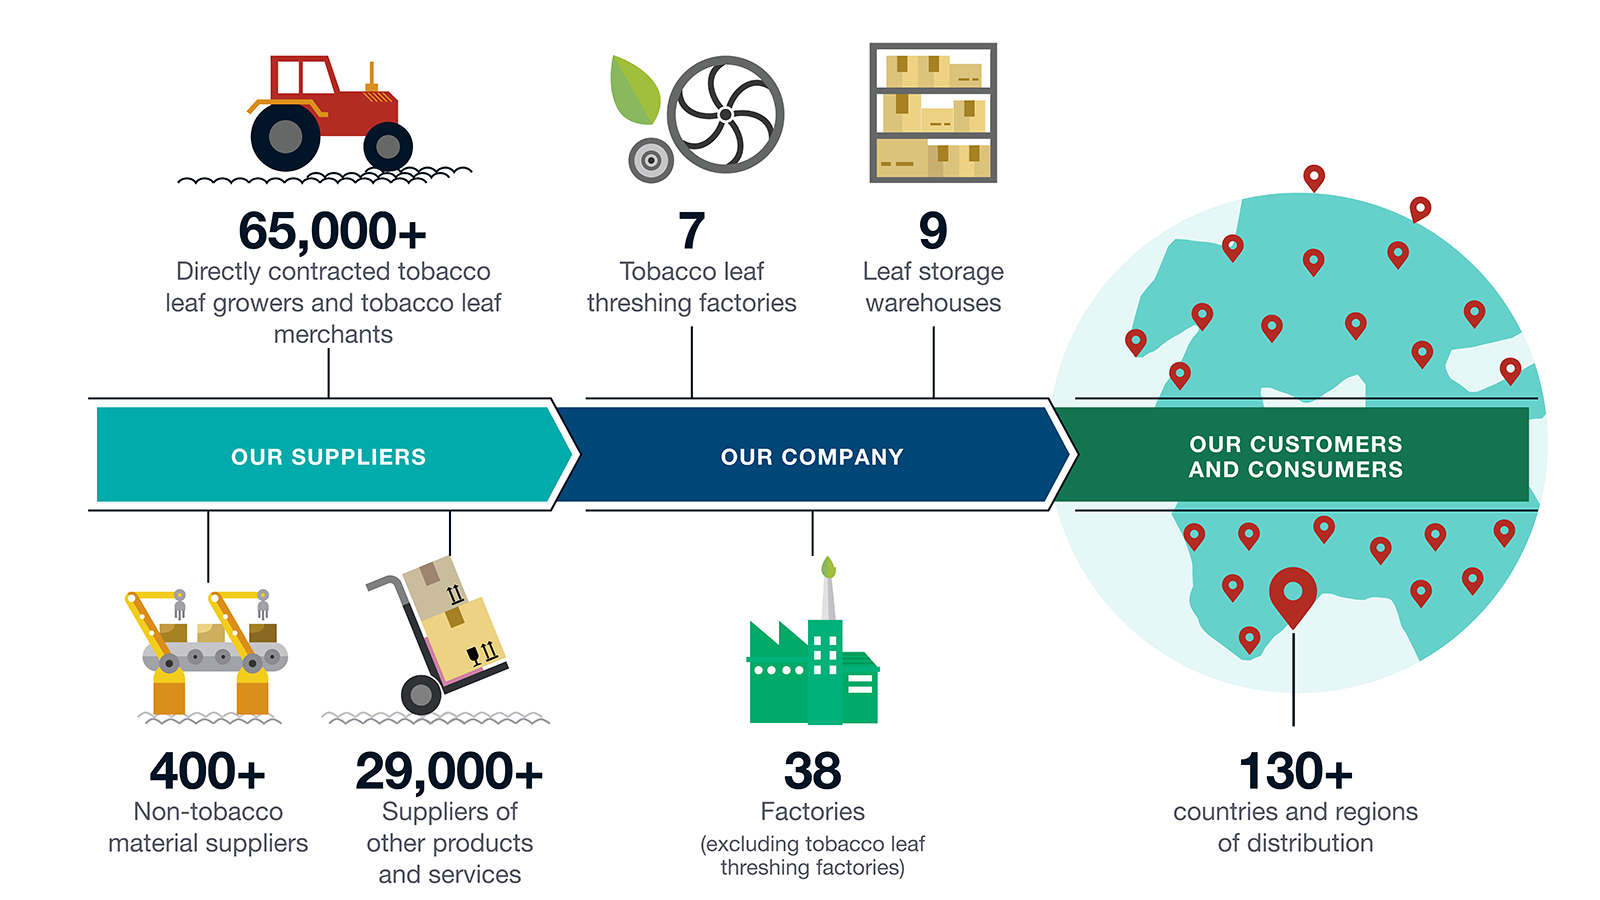 OUR TOBACCO BUSINESS VALUE CHAIN